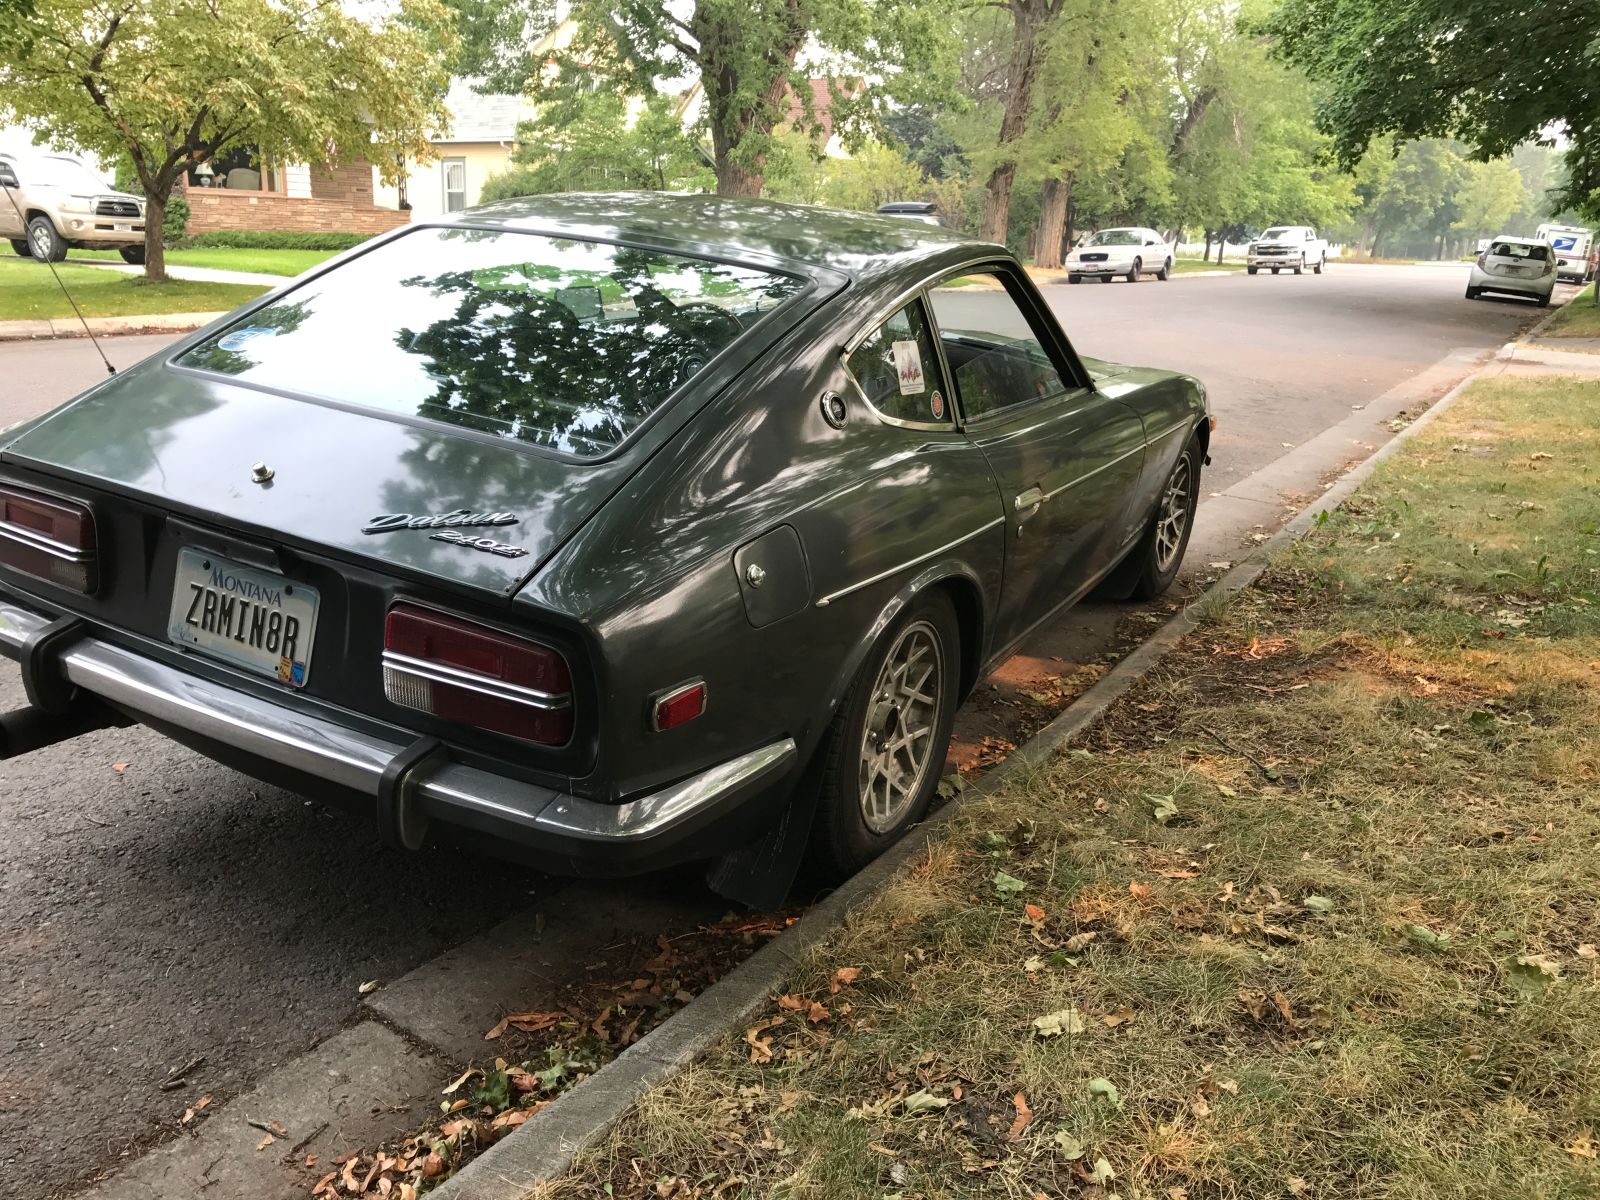 My Dads 1972 Datsun 240Z with a 2.5&quot; exhaust mated to a 3.1L stroker engine. It’s a good way to die. 